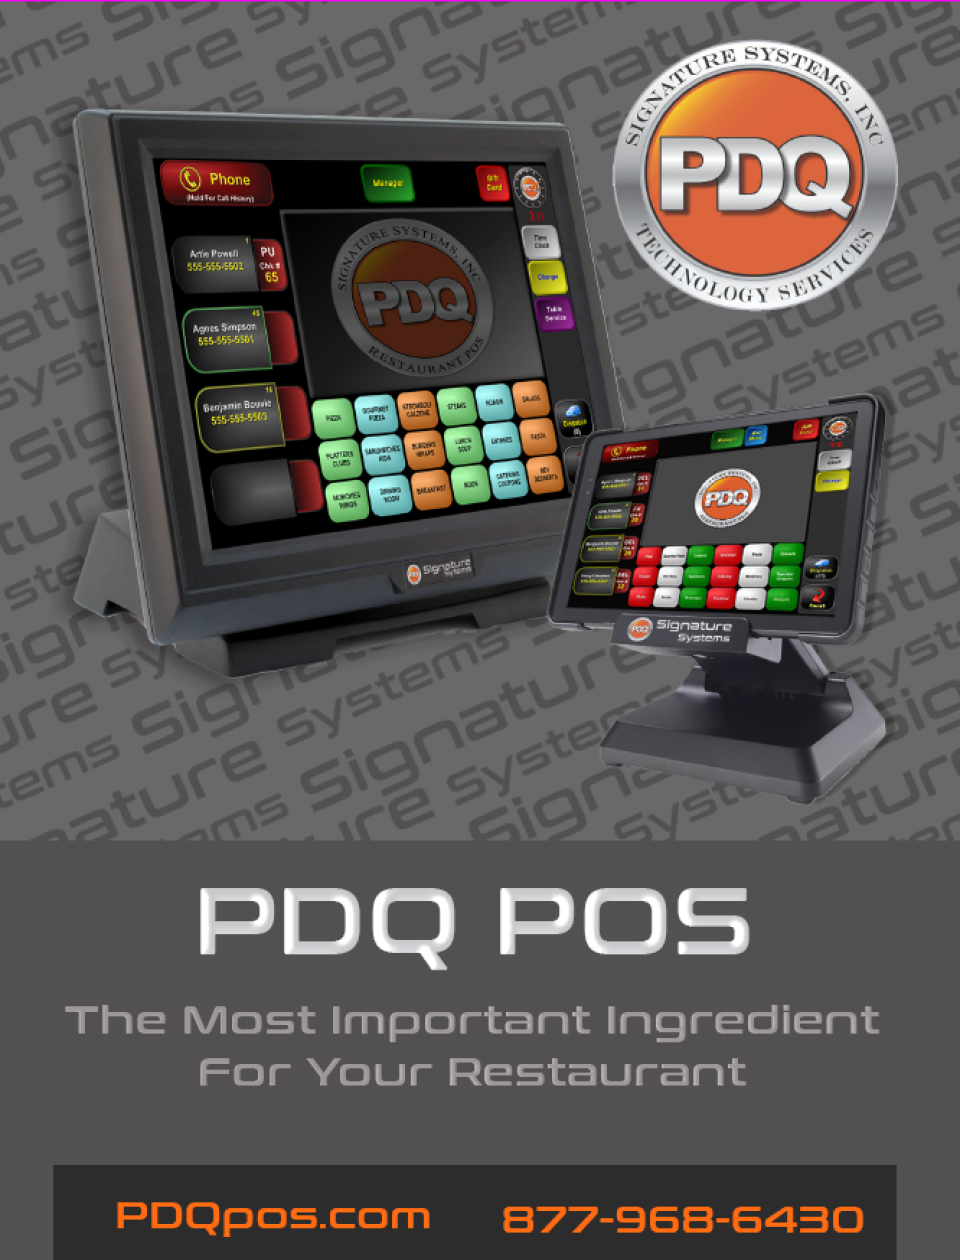 Pdq software pricing list